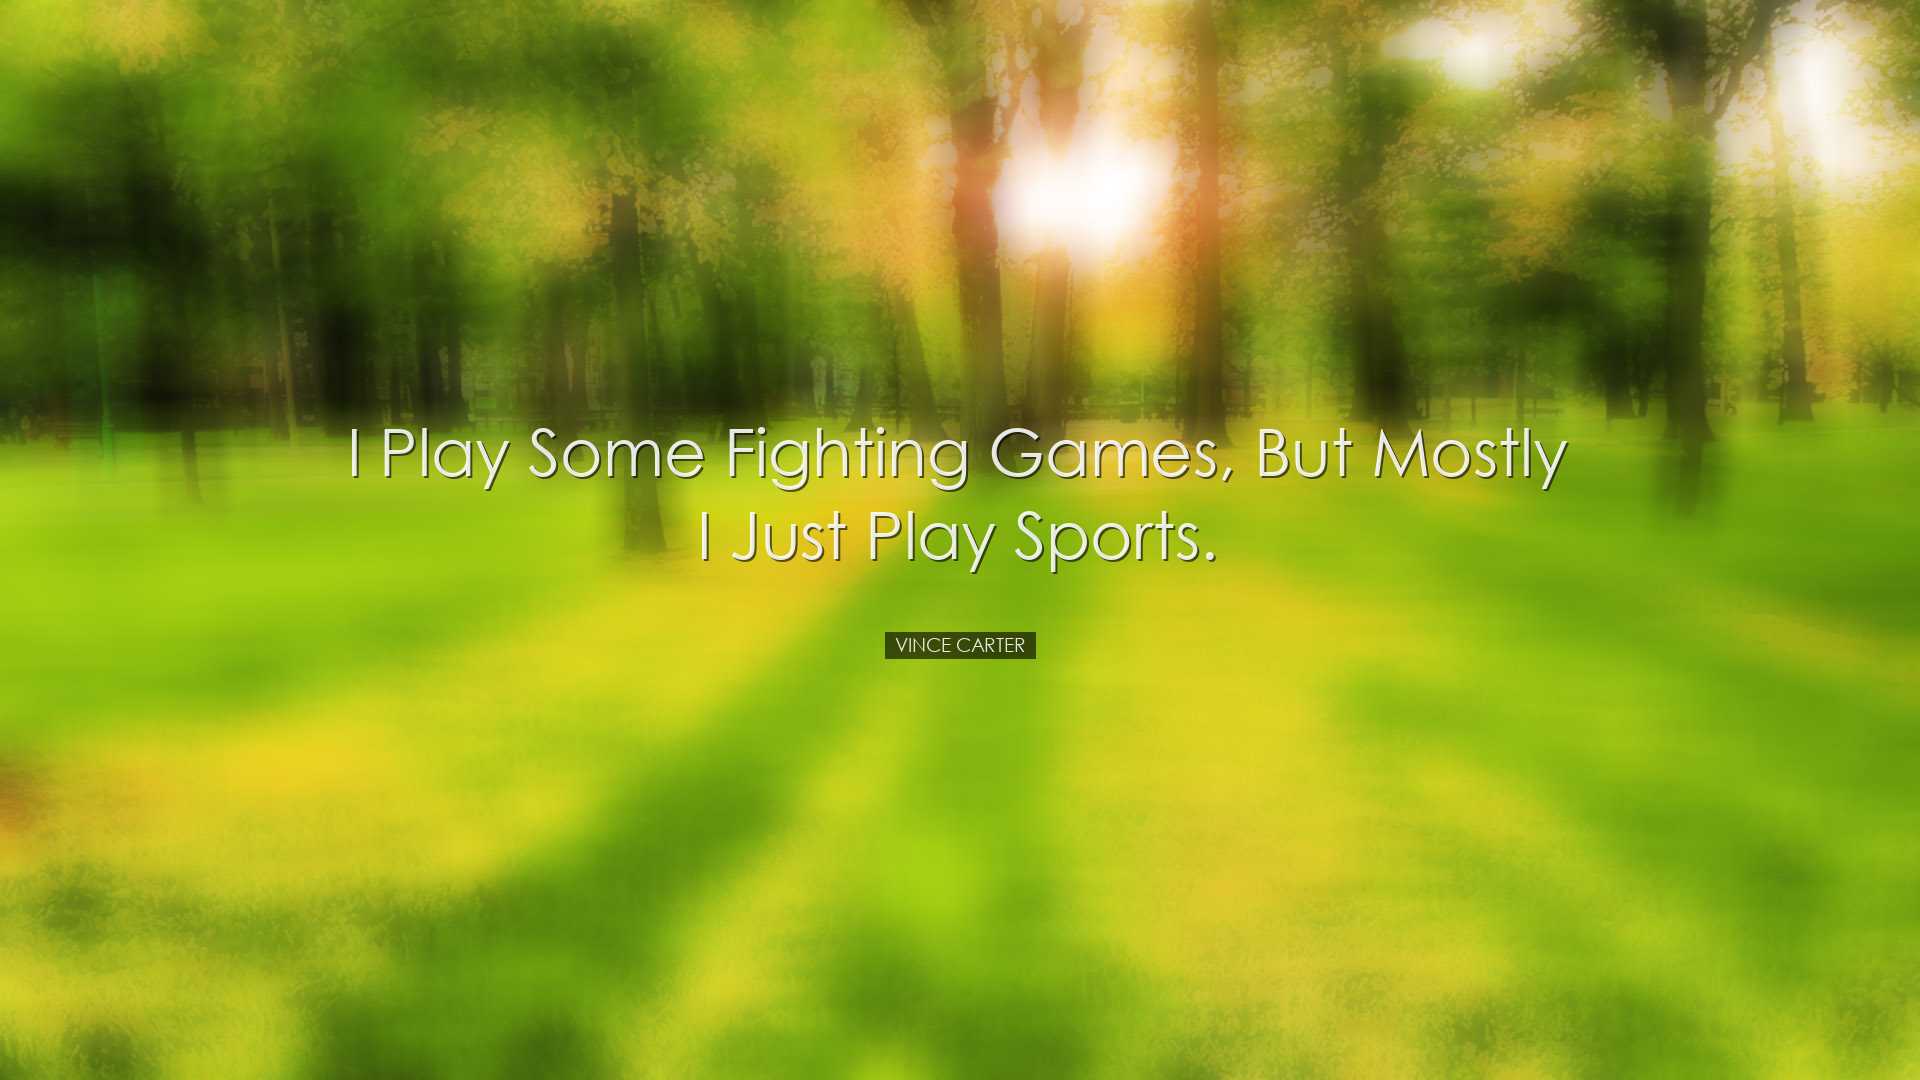 I play some fighting games, but mostly I just play sports. - Vince